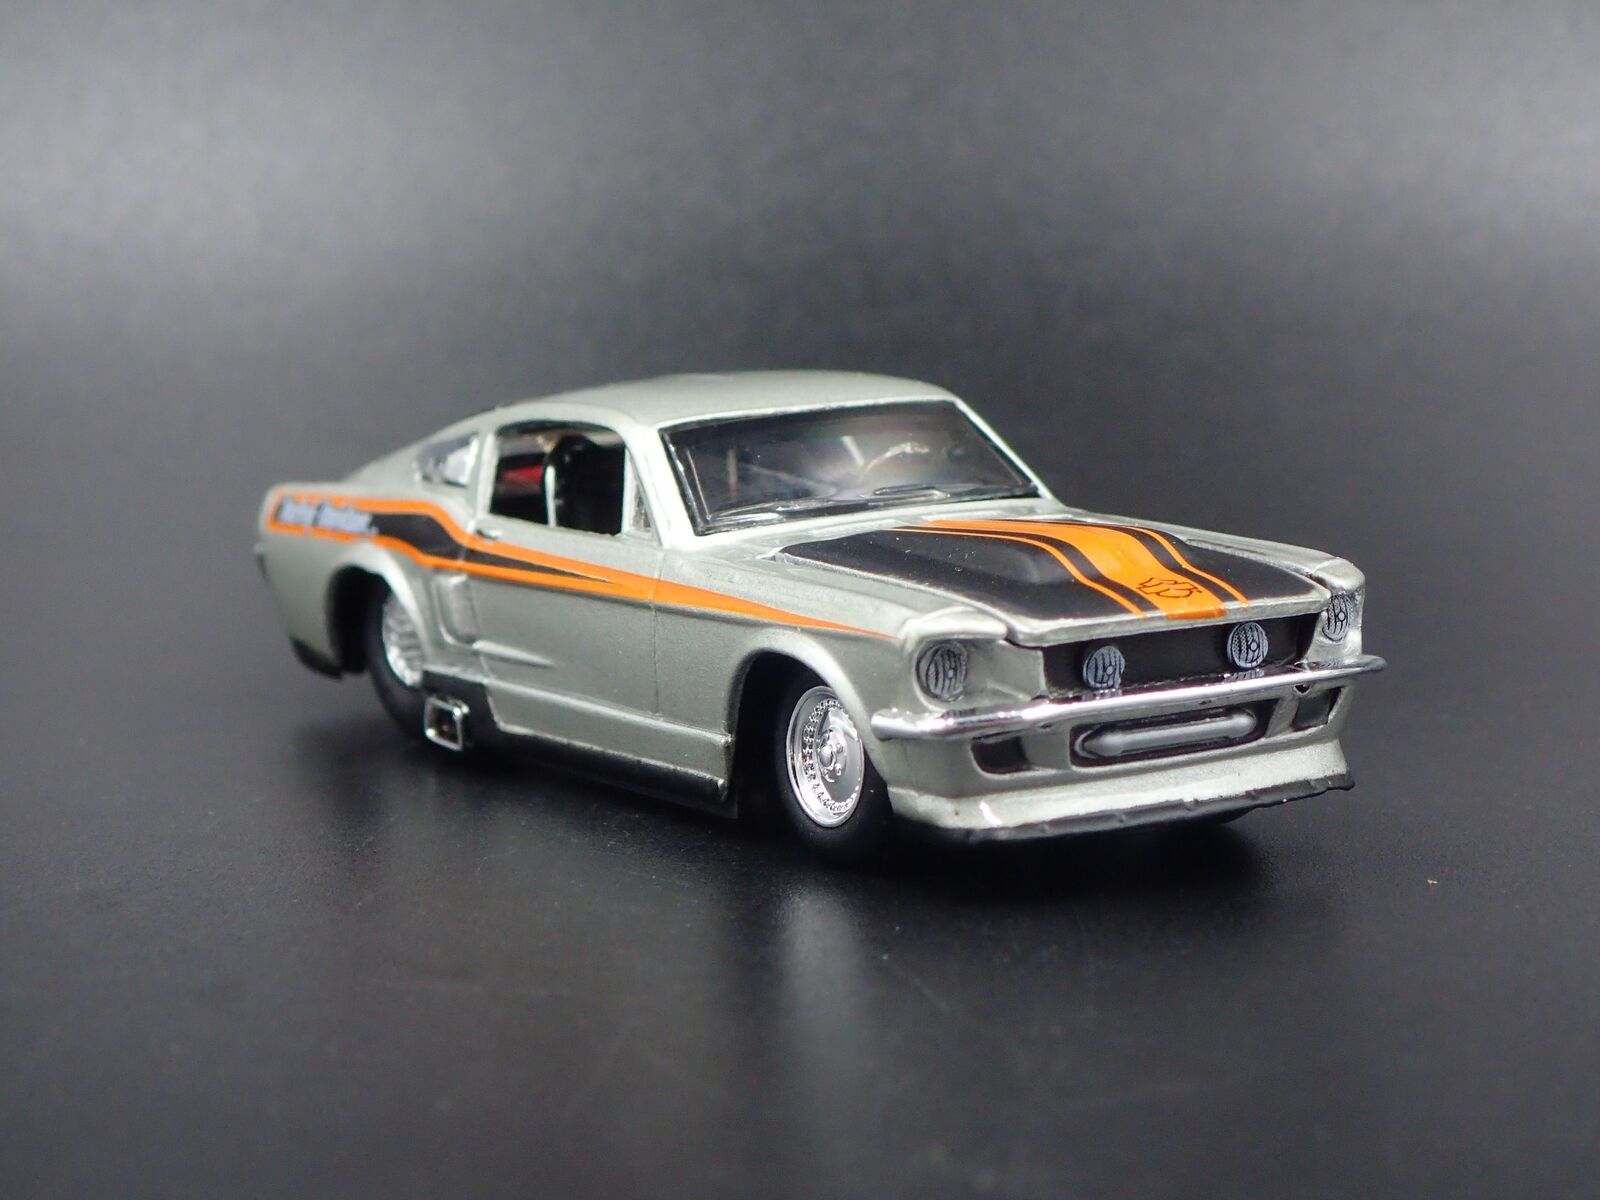 1967 67 FORD MUSTANG GT FASTBACK HARLEY DAVIDSON 1:64 SCALE DIECAST relisted